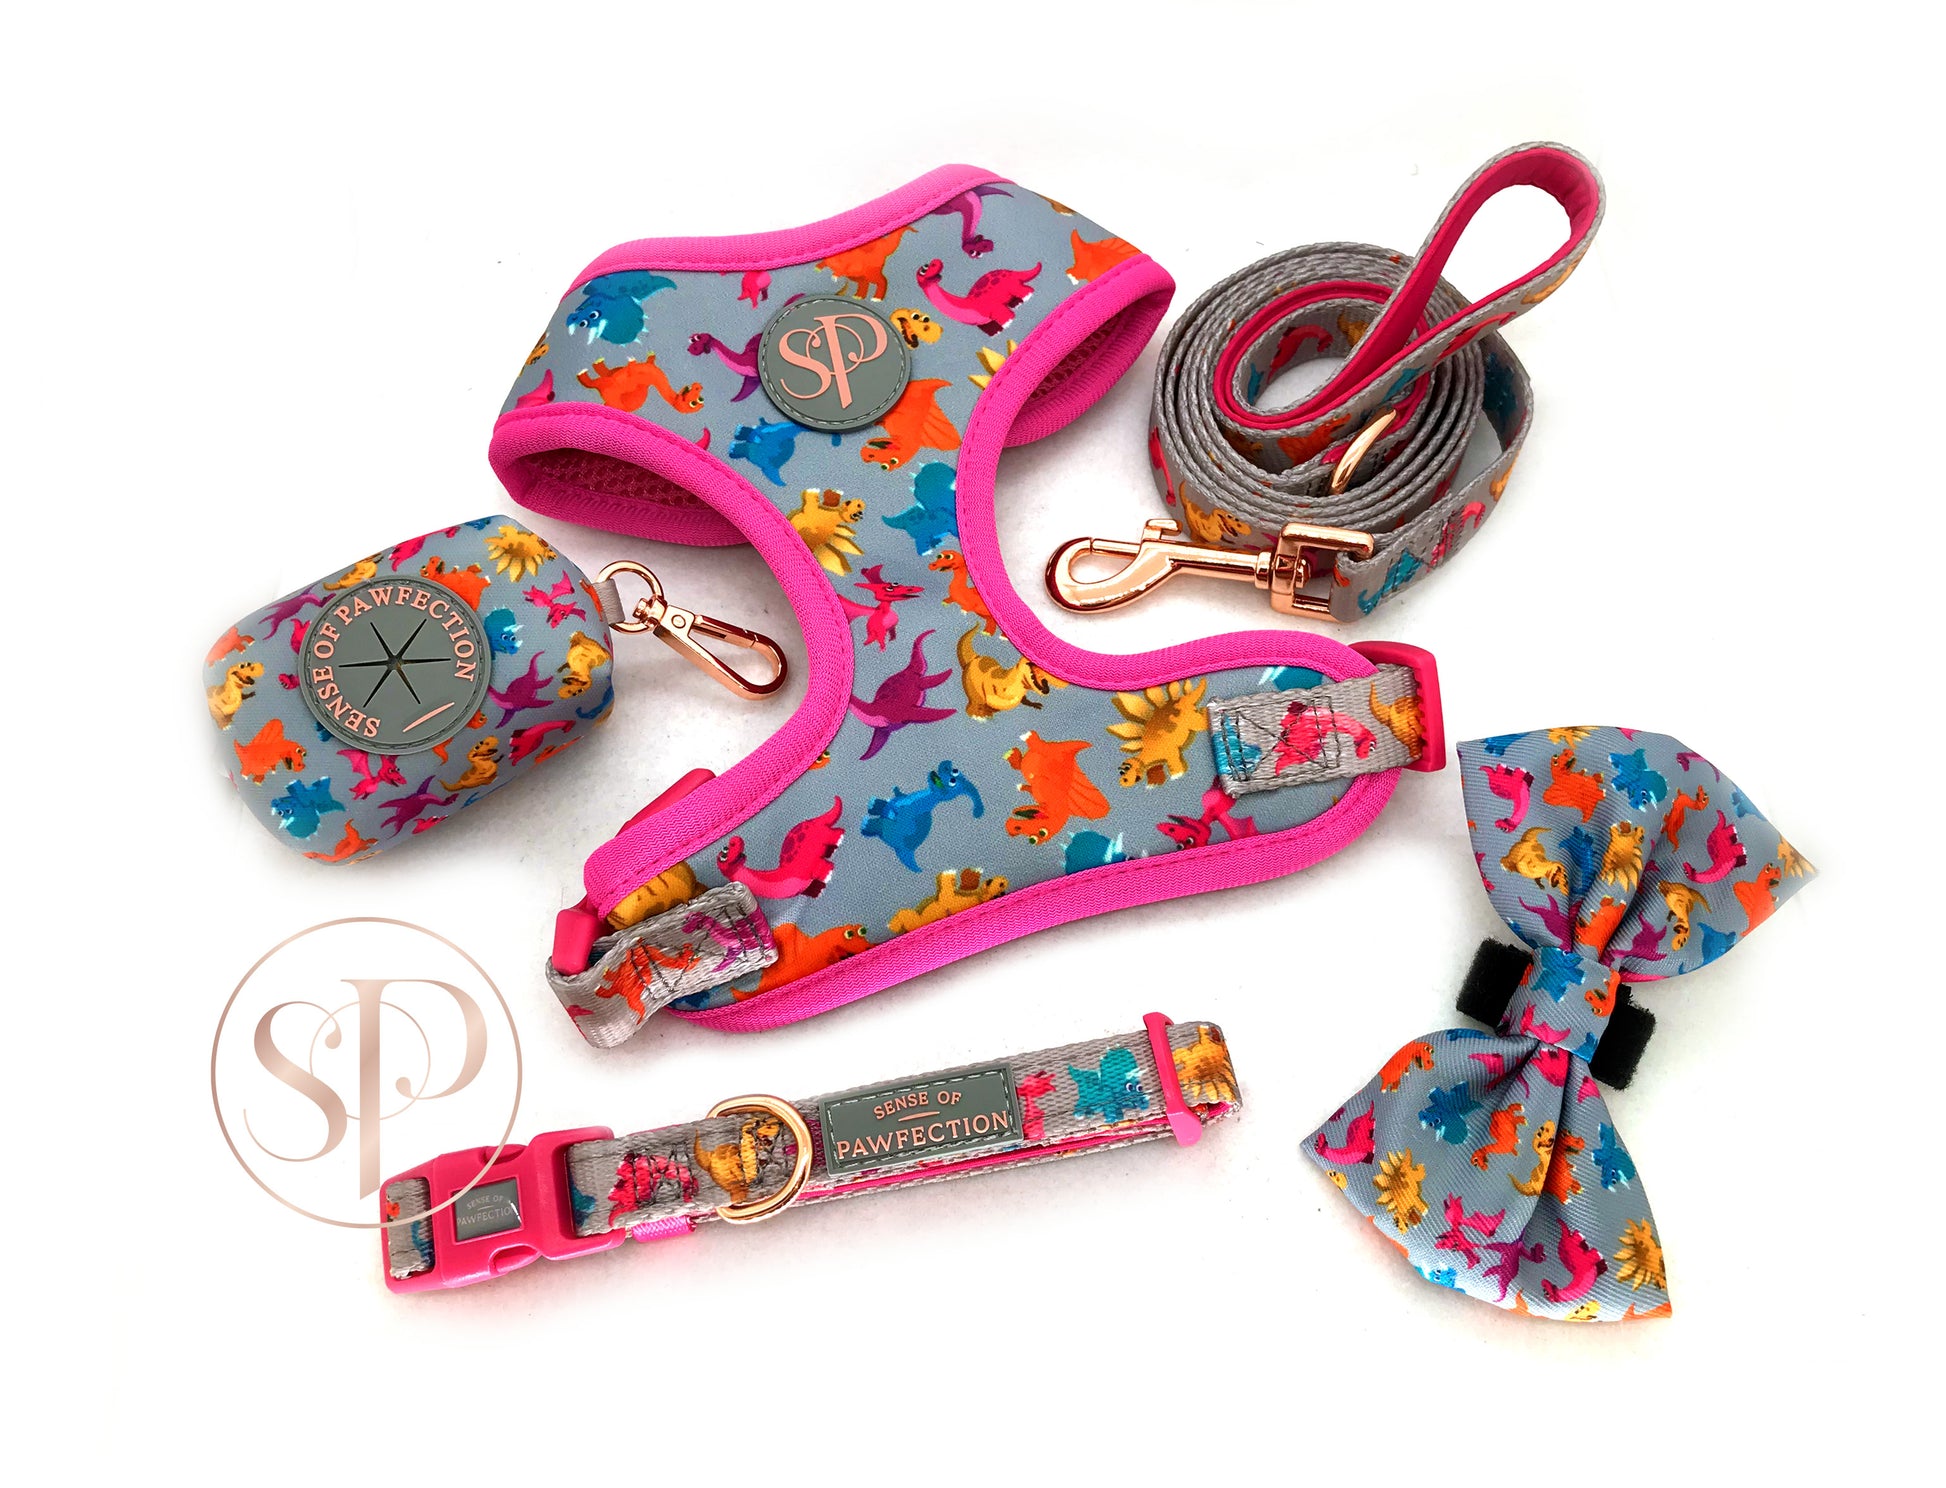 A super cute and colourful Dinosaur dog lead, harness, collar, bow and doggy bag holder from the Dogasaurs Collection.